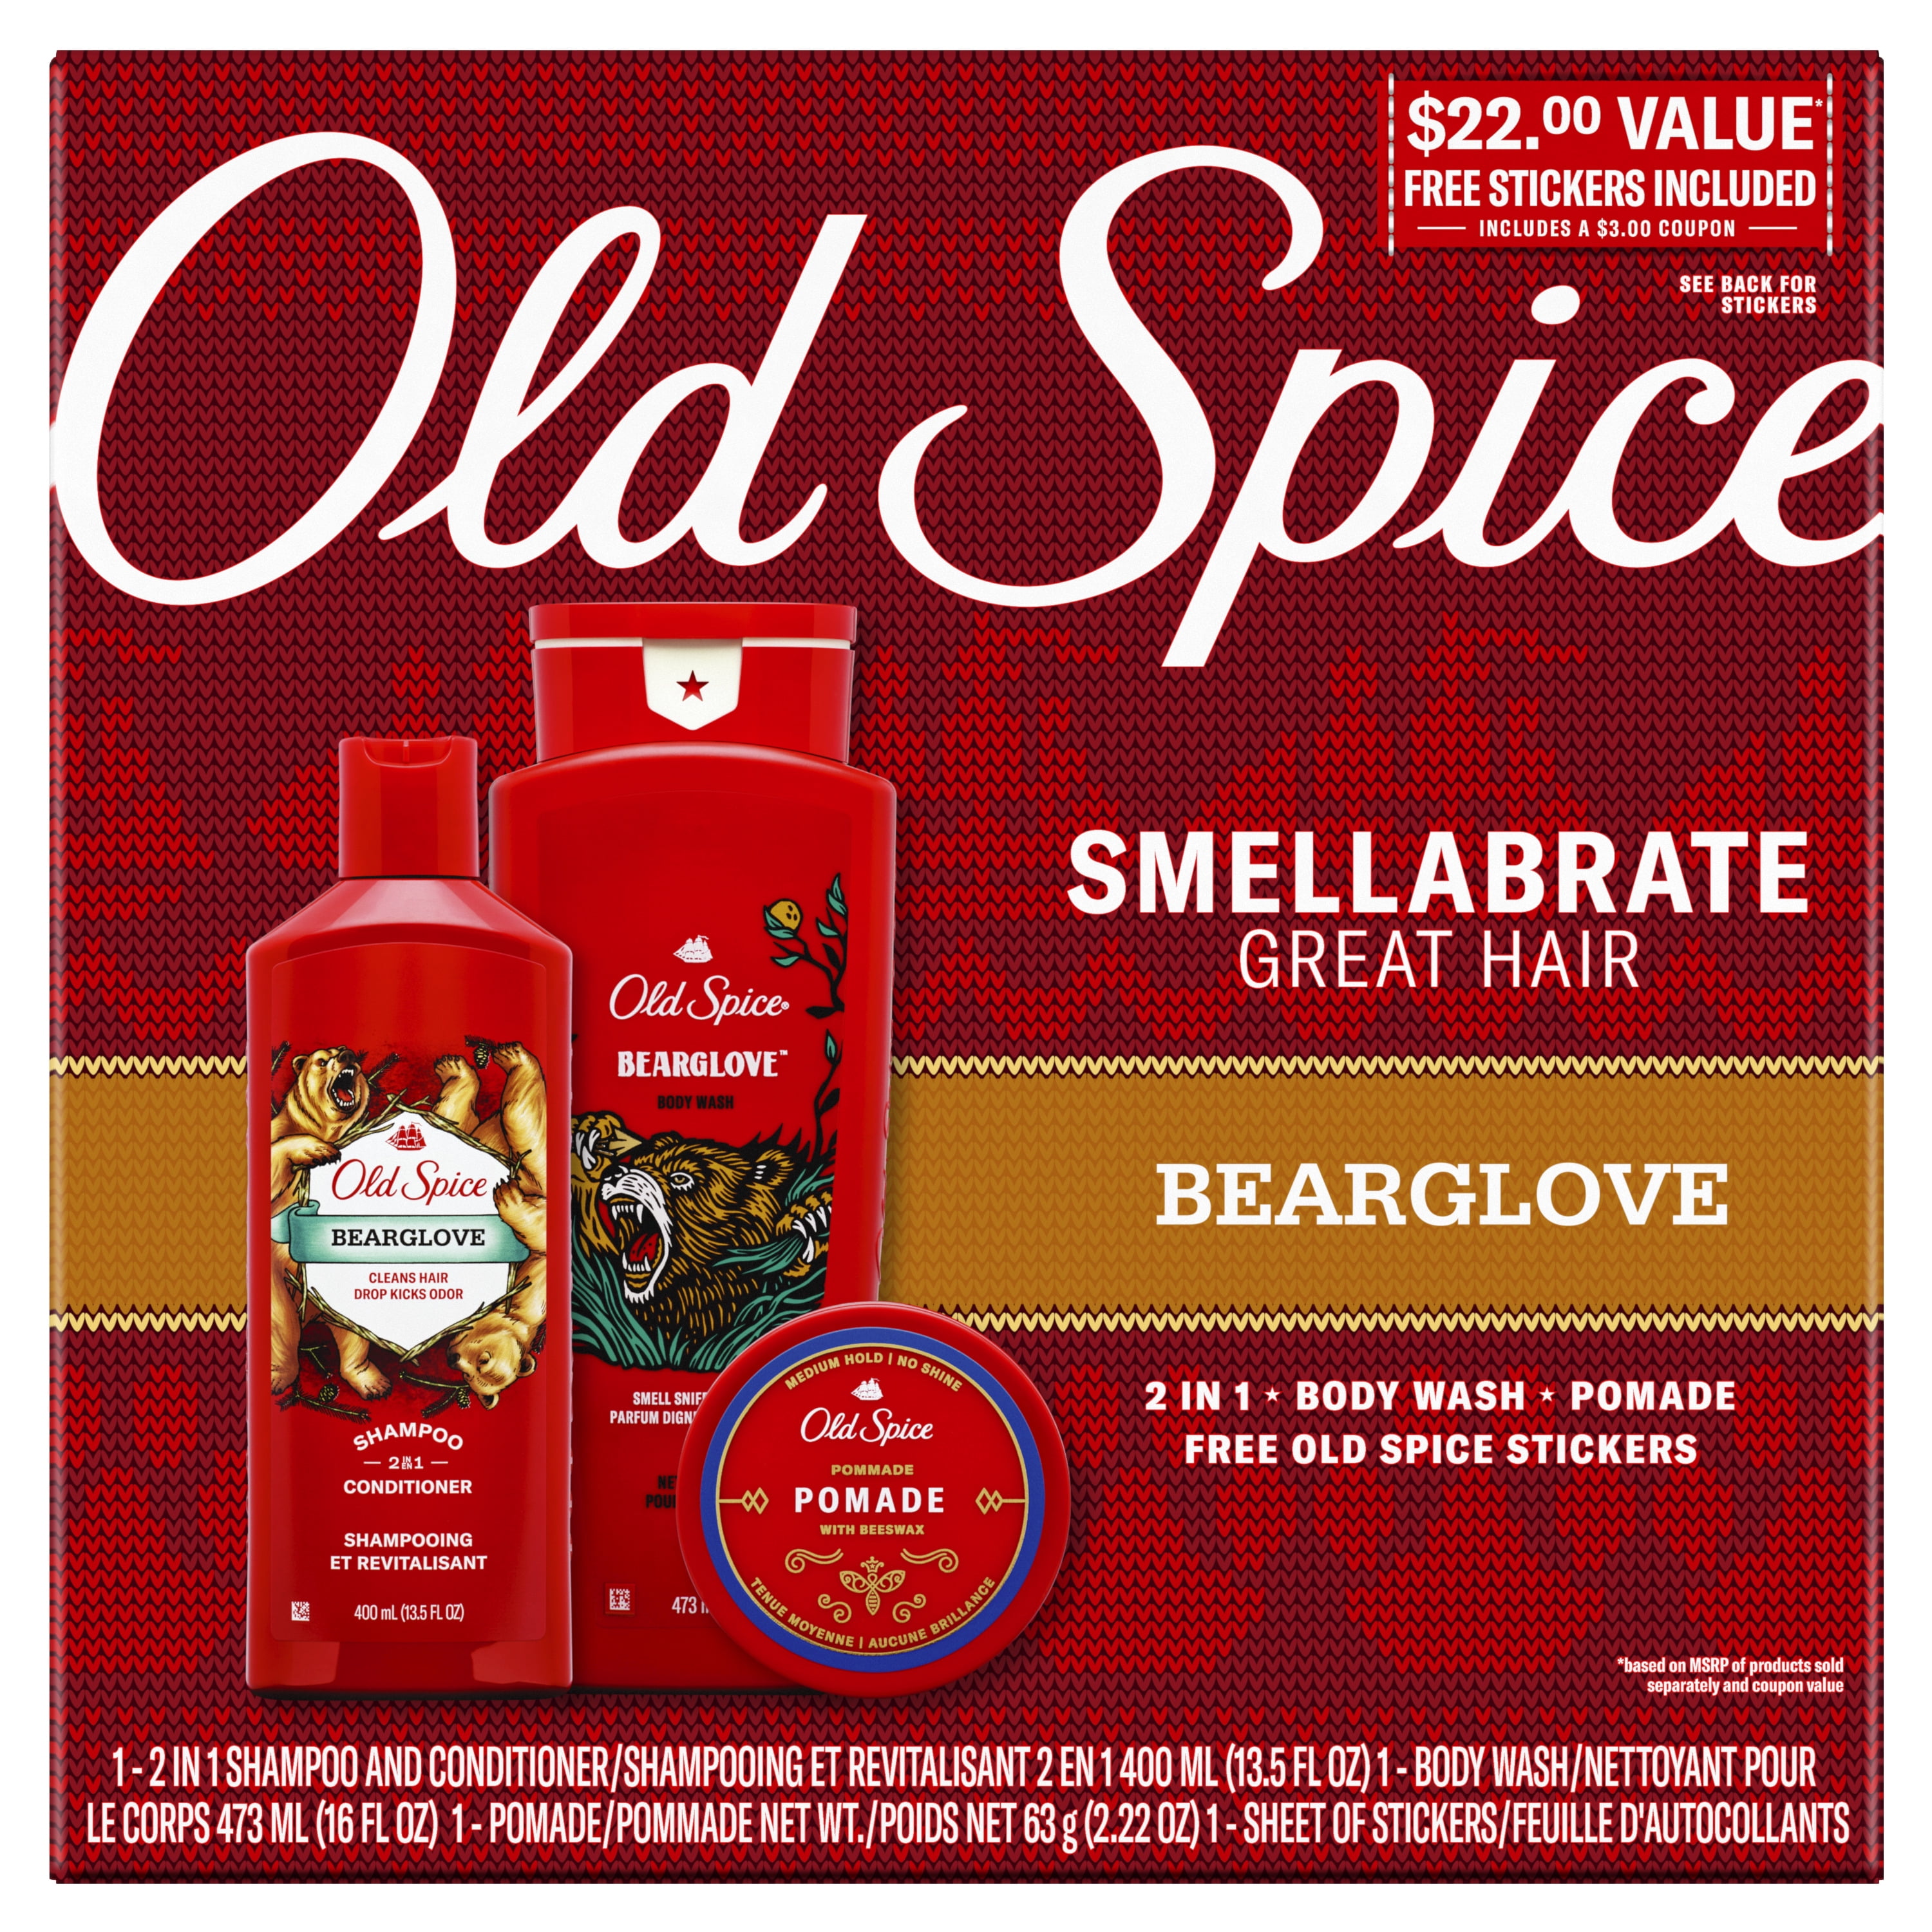 ($22 VALUE) Old Spice Hair Style Bearglove Holiday Pack With 2 in 1 Shampoo and Conditioner, Body Wash, Hair Pomade and Sheet of Stickers